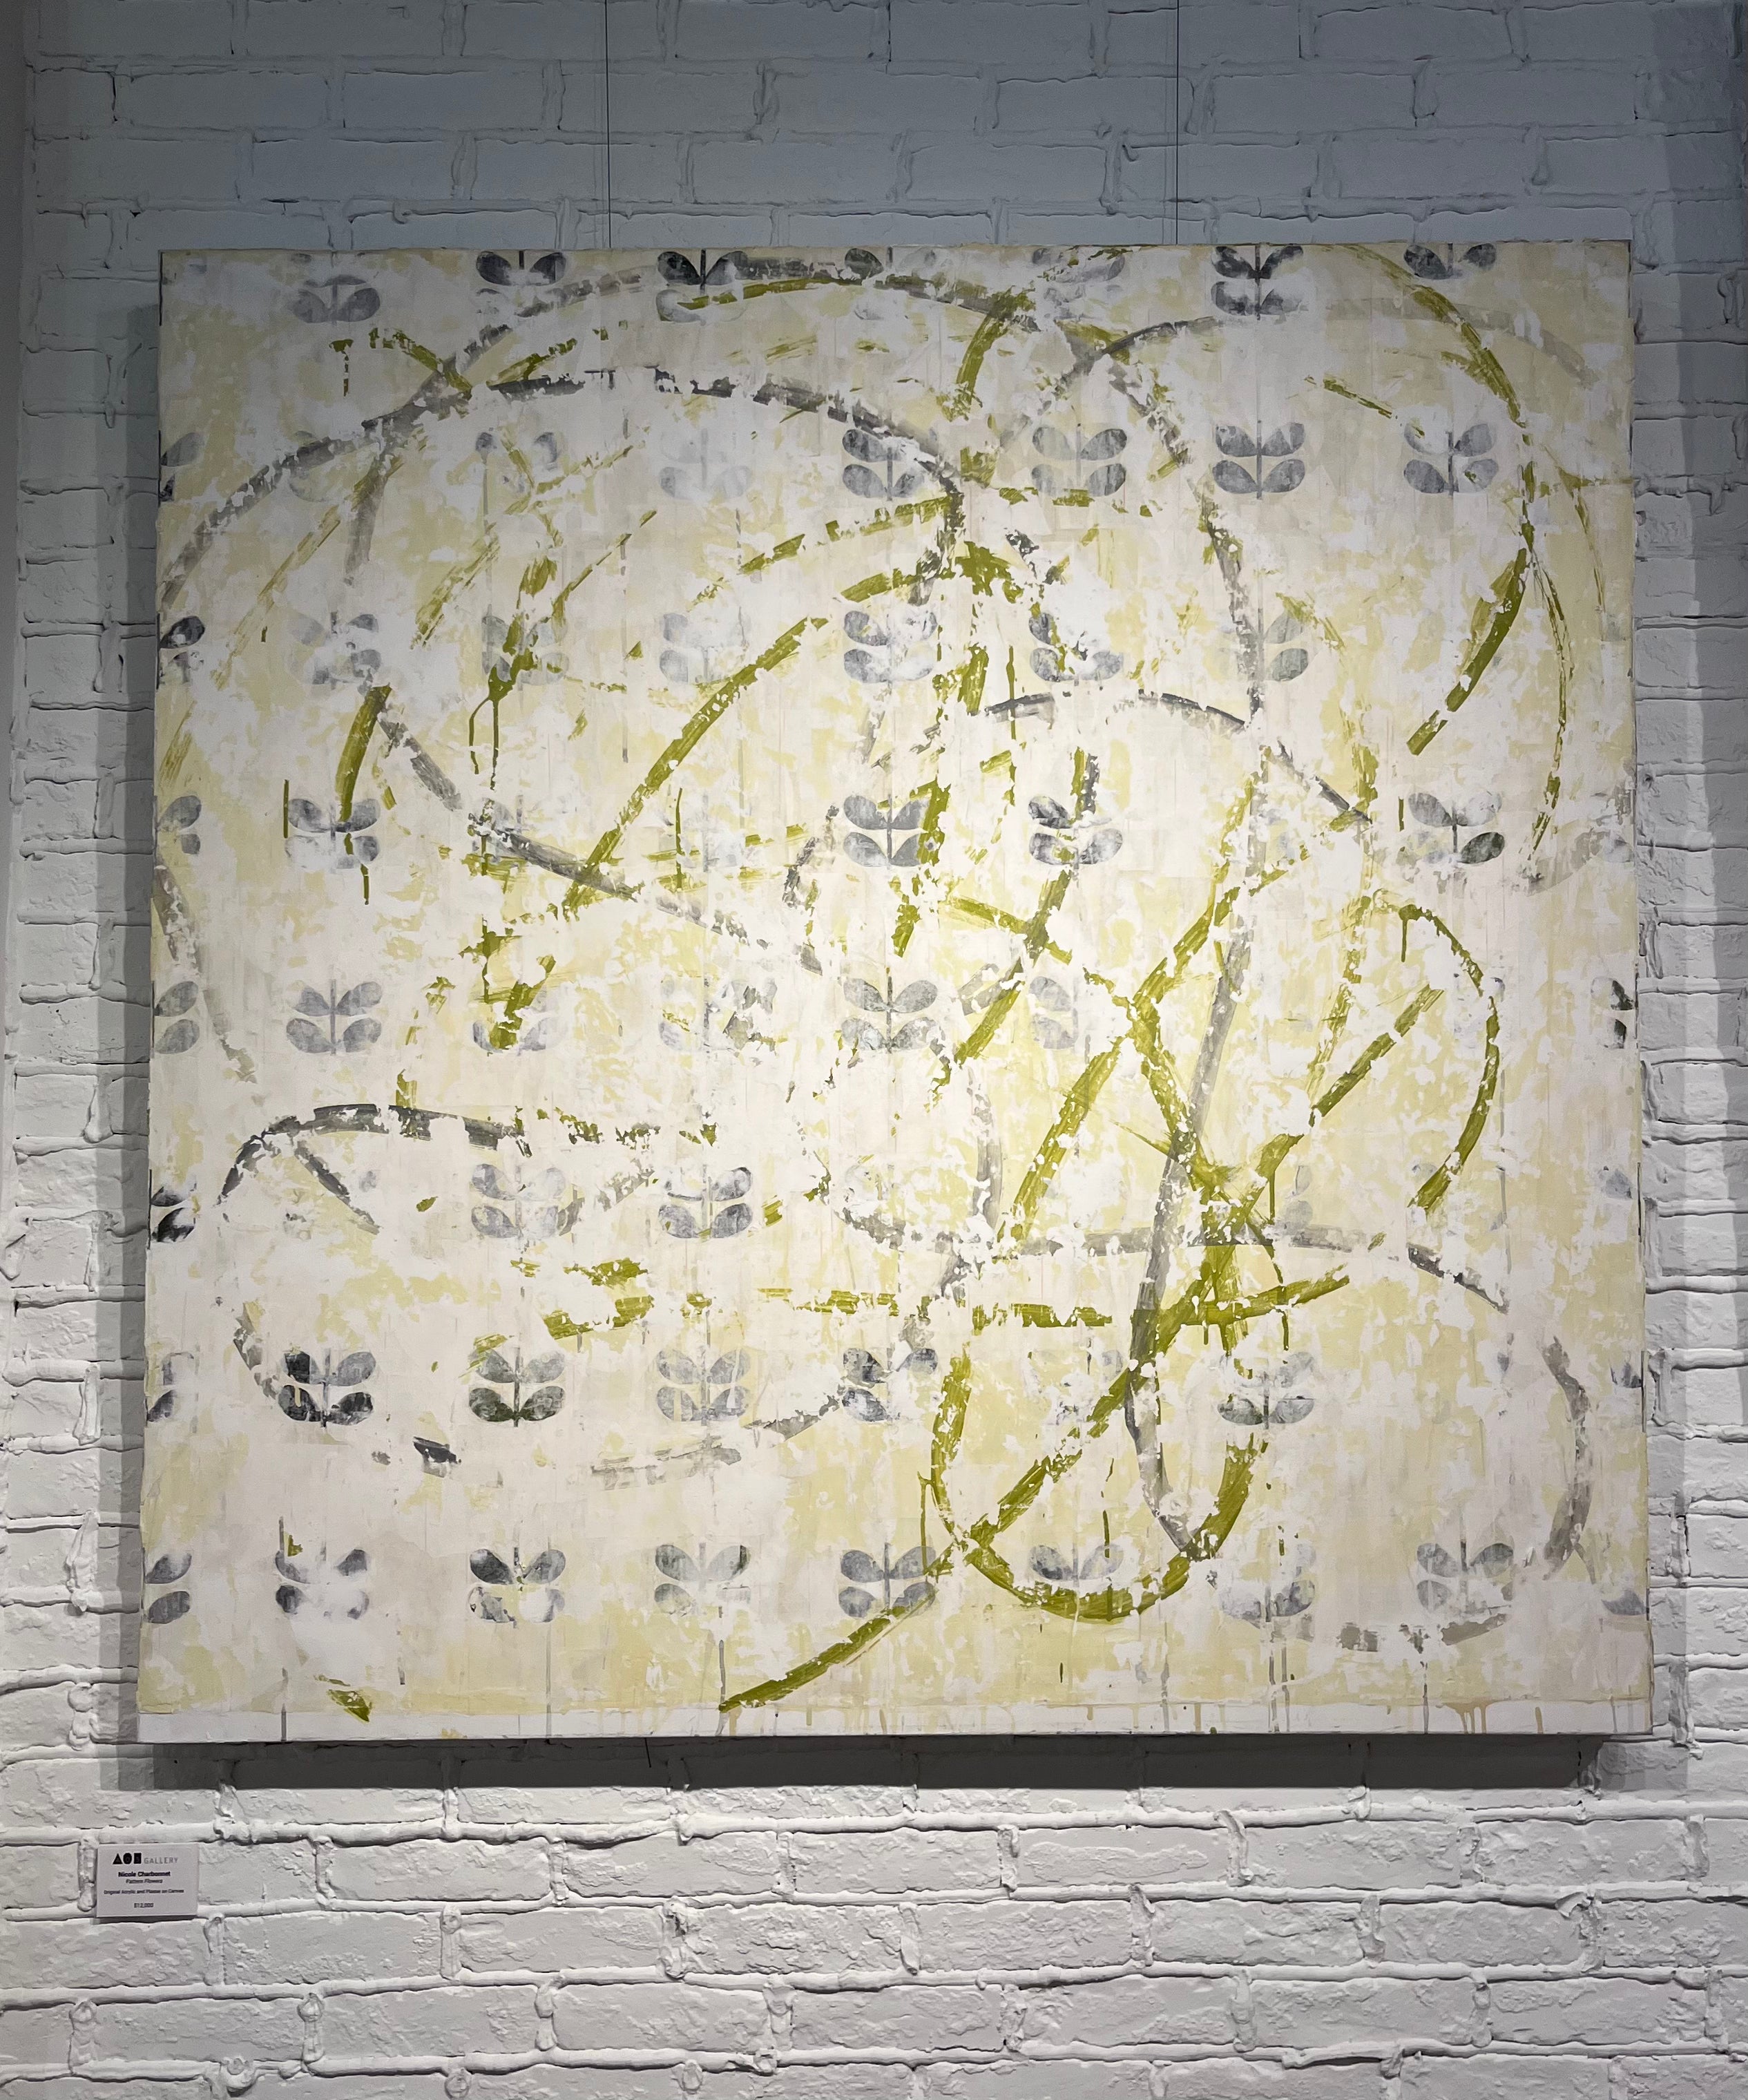 Nicole Charbonnet oversized original abstract artwork Green loopy paint over flowers.